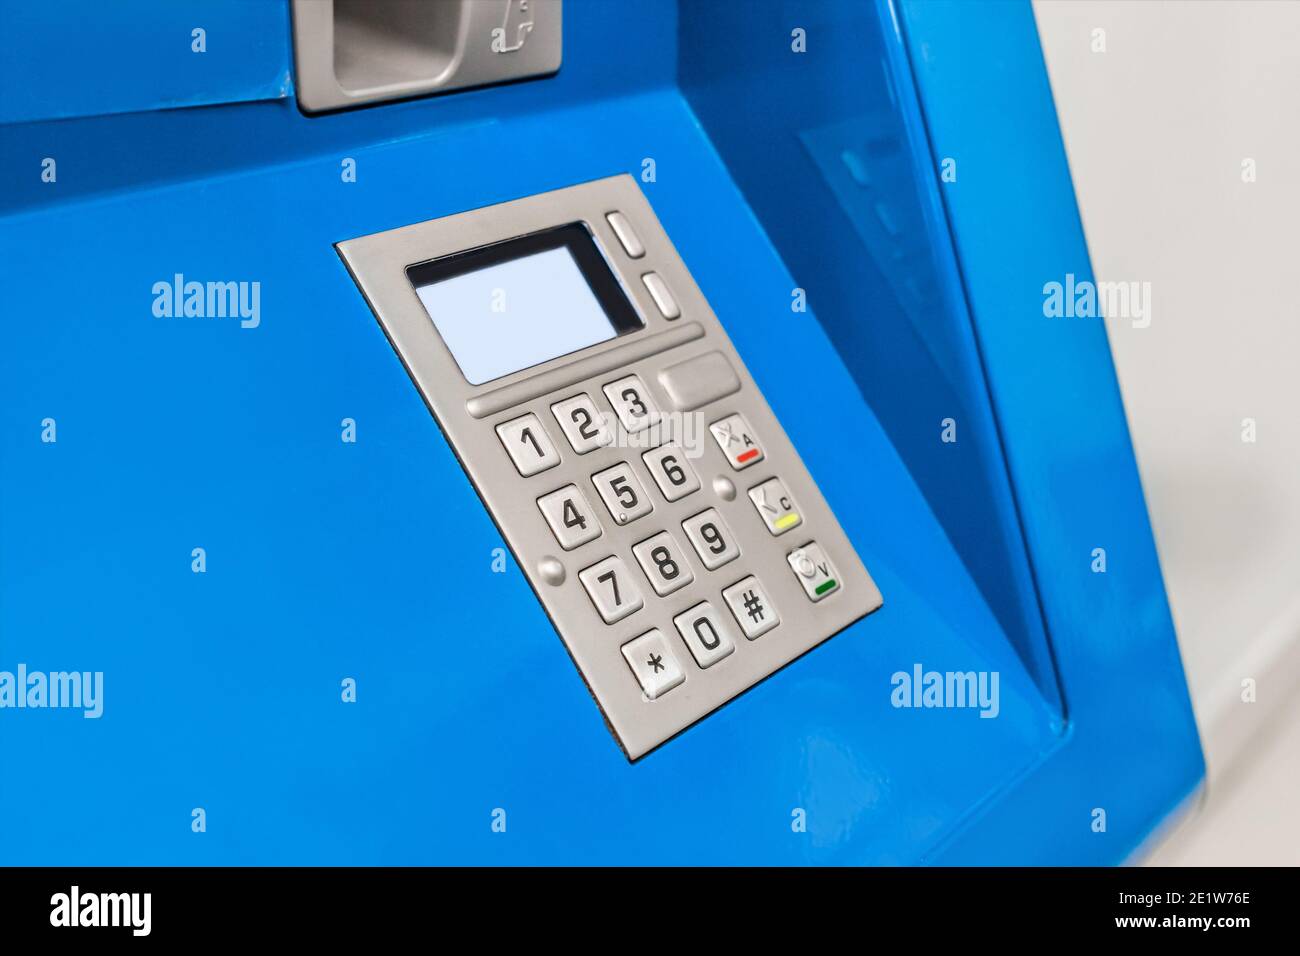 Keypad with a screen for dialing numbers and symbols pin-code terminal for issuing money, close-up. Stock Photo